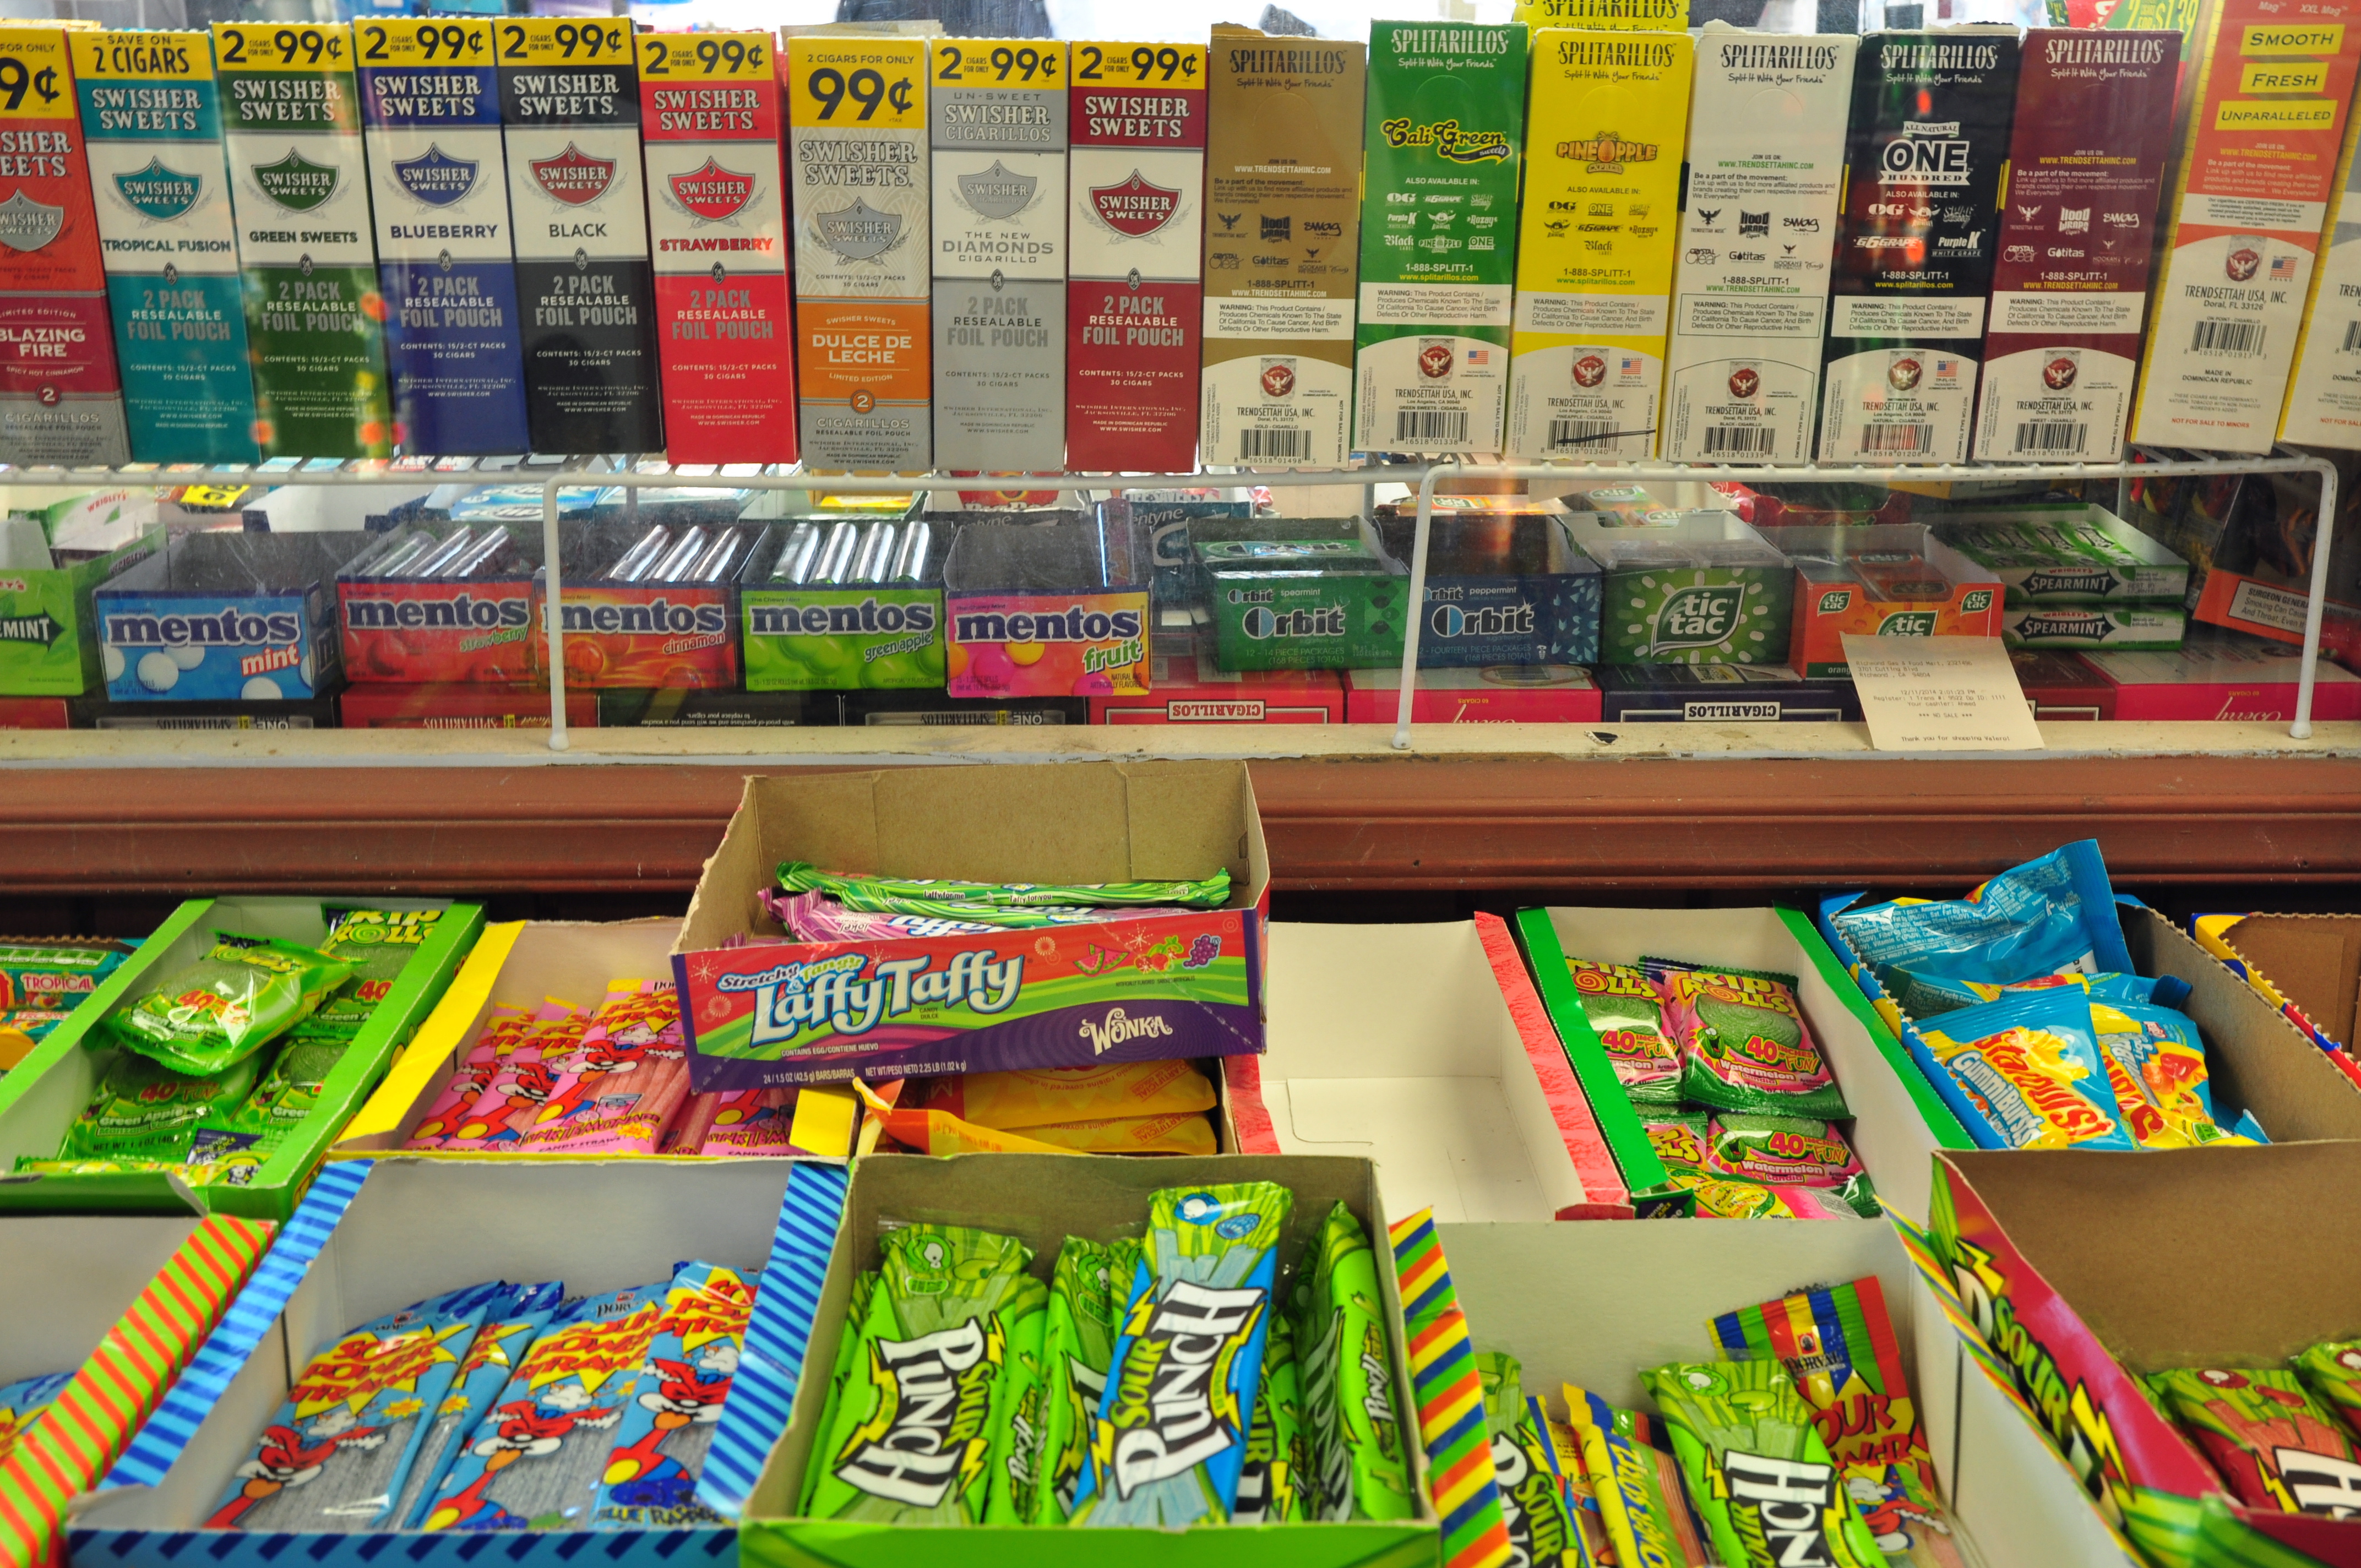 Display of Tobacco products rin a retail store